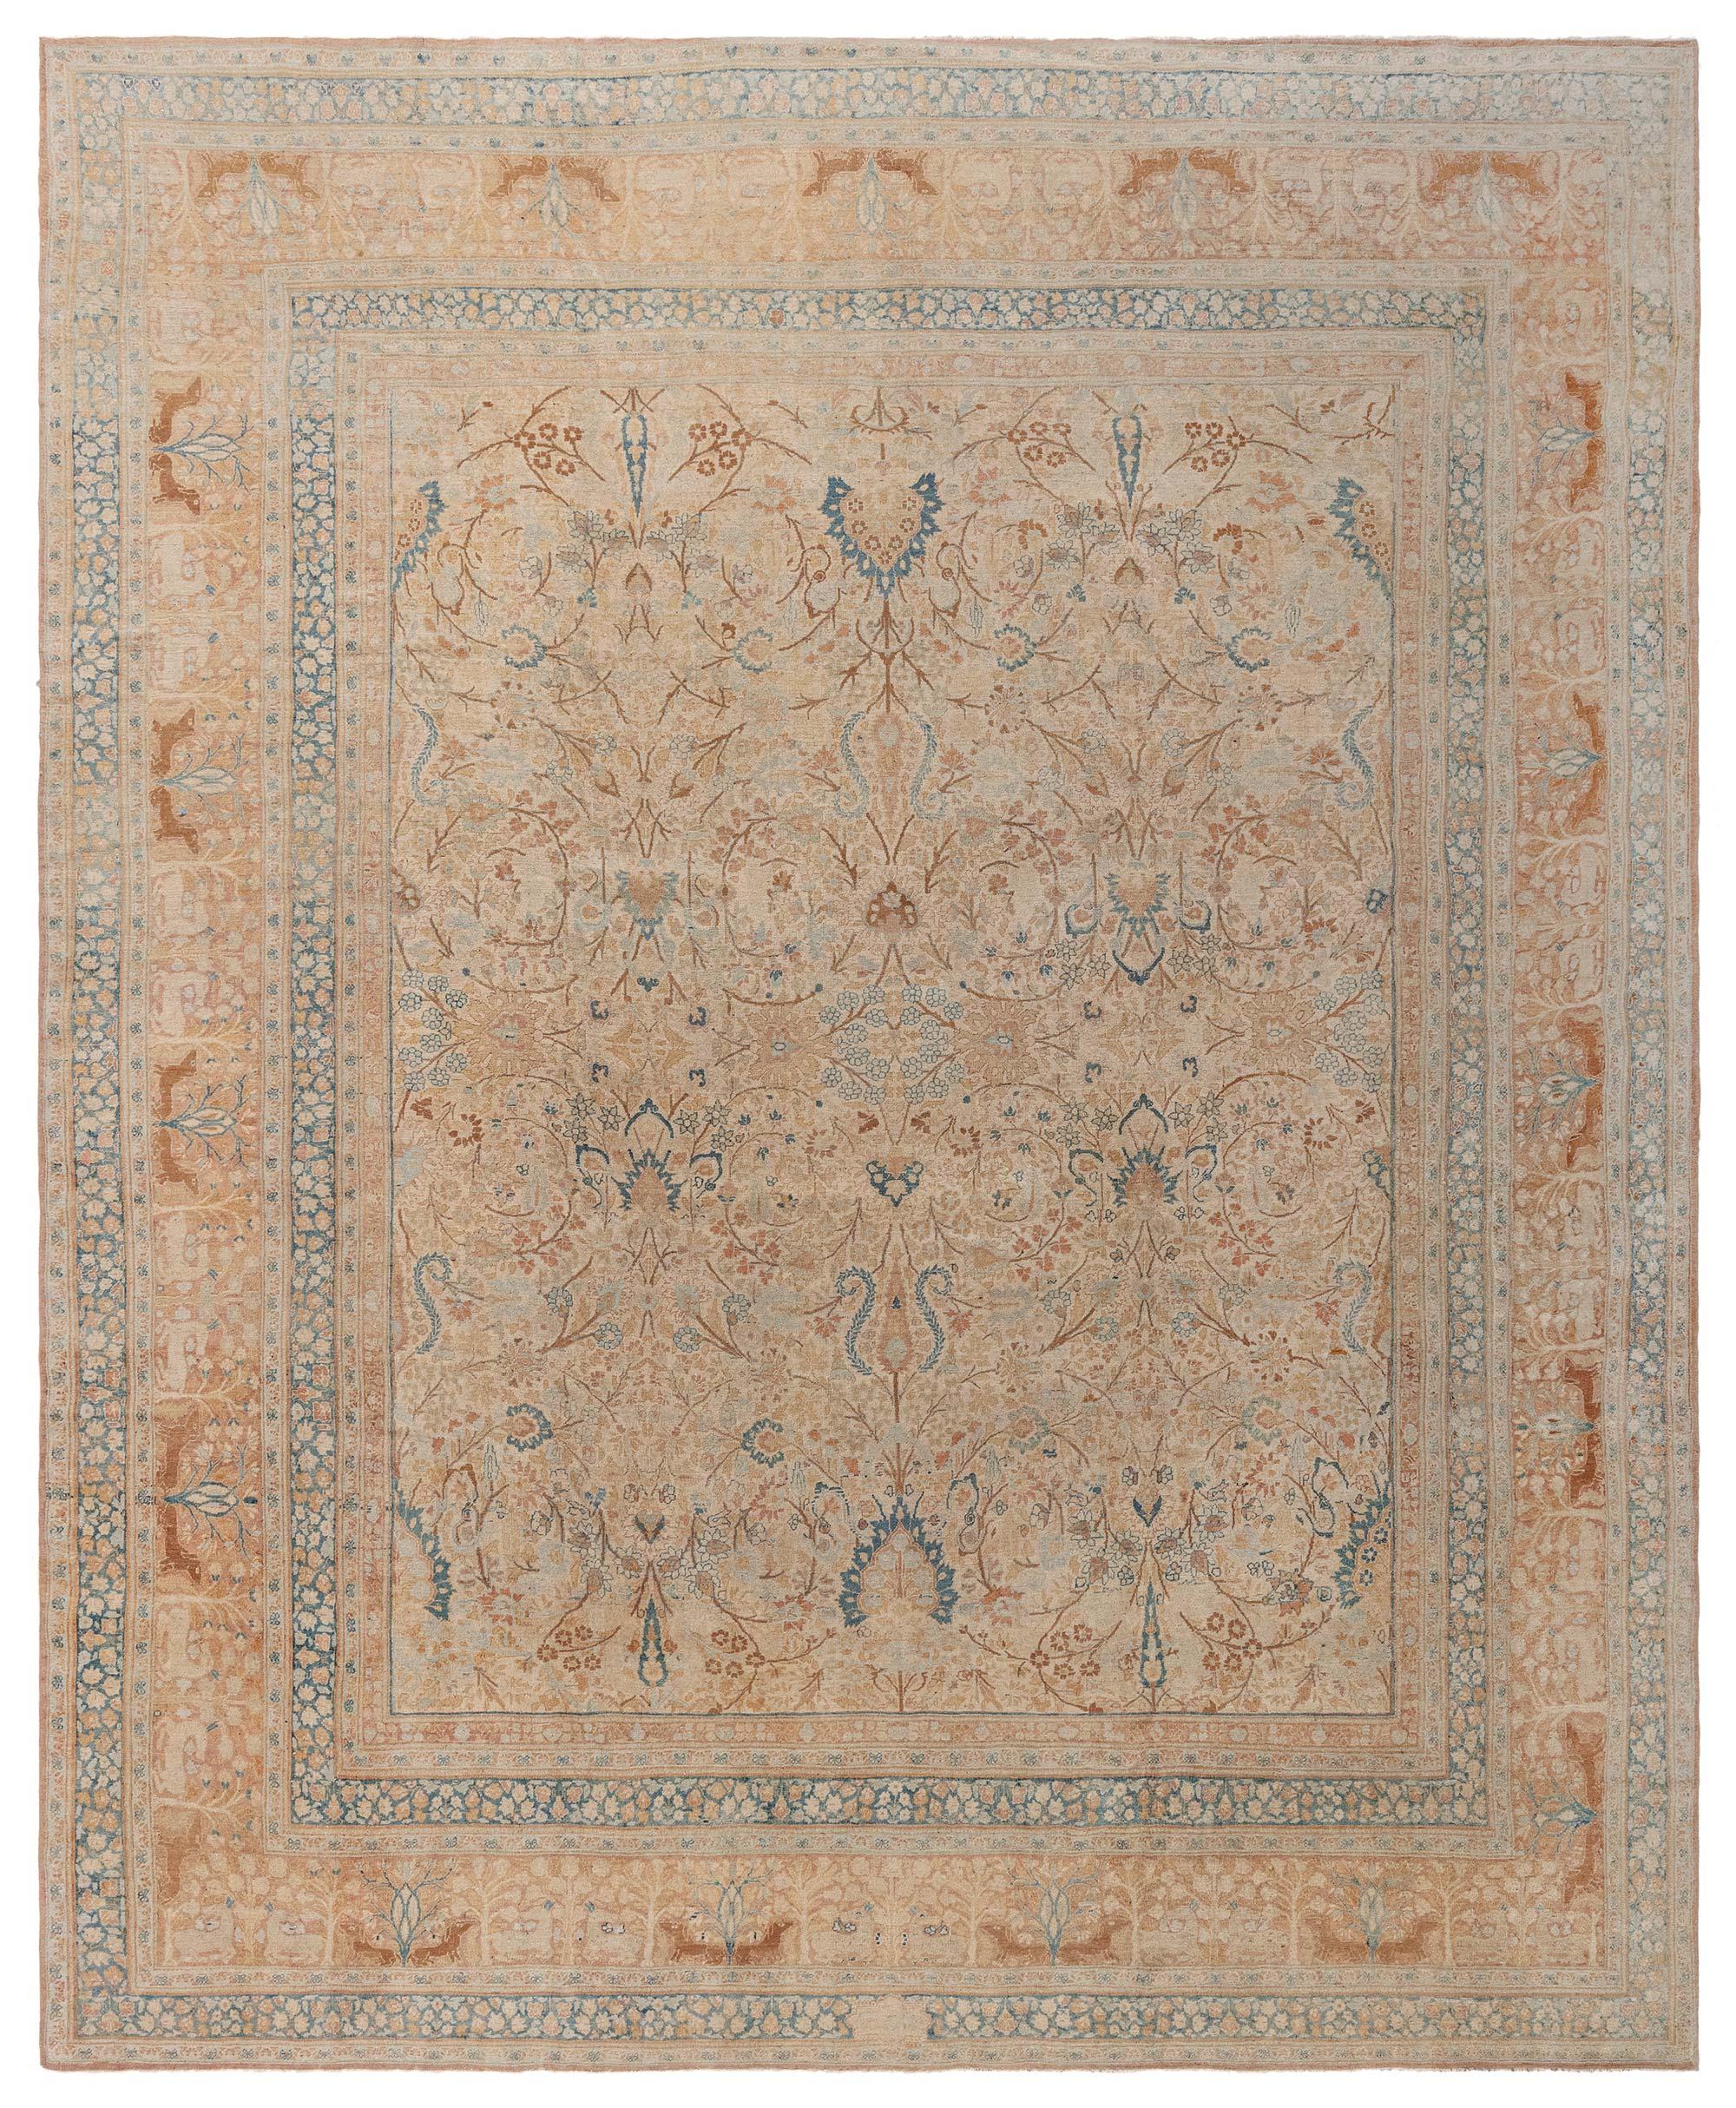 Early 20th Century Antique Persian Meshad Hand Knotted Wool Carpet